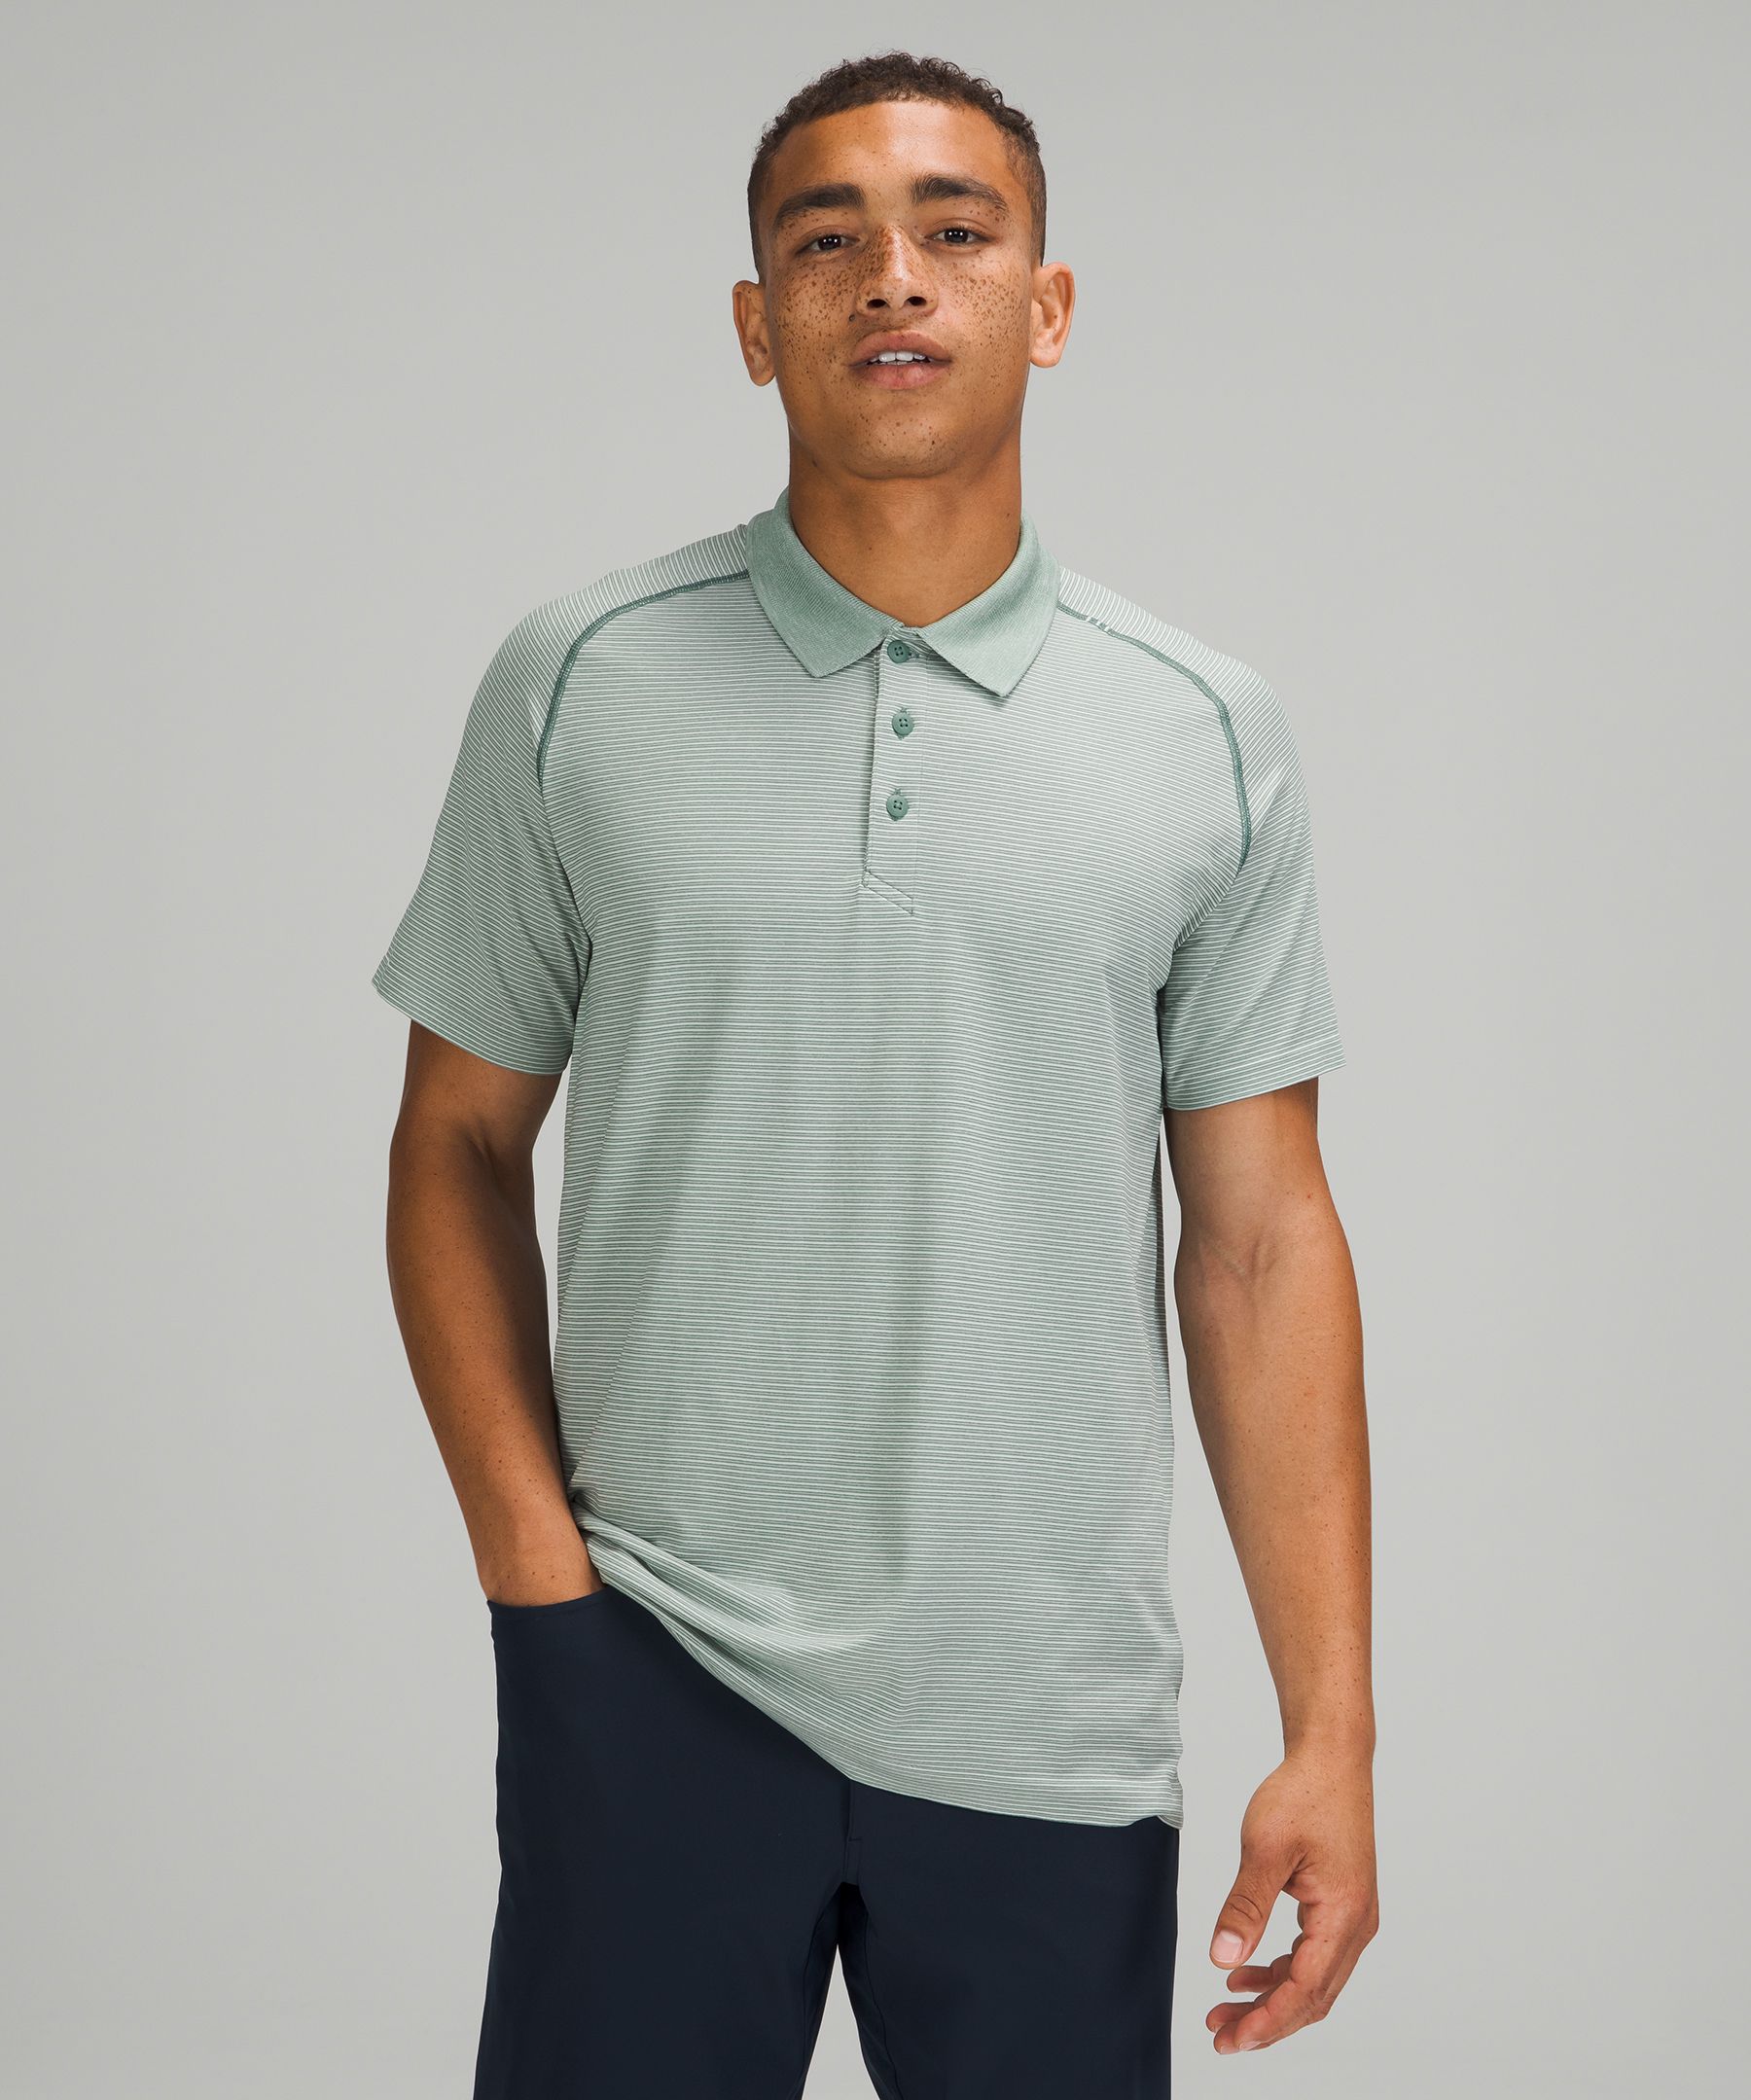 Lululemon Metal Vent Tech Polo Shirt 2.0 *online Only In Spandex Stripe White/tidewater Teal